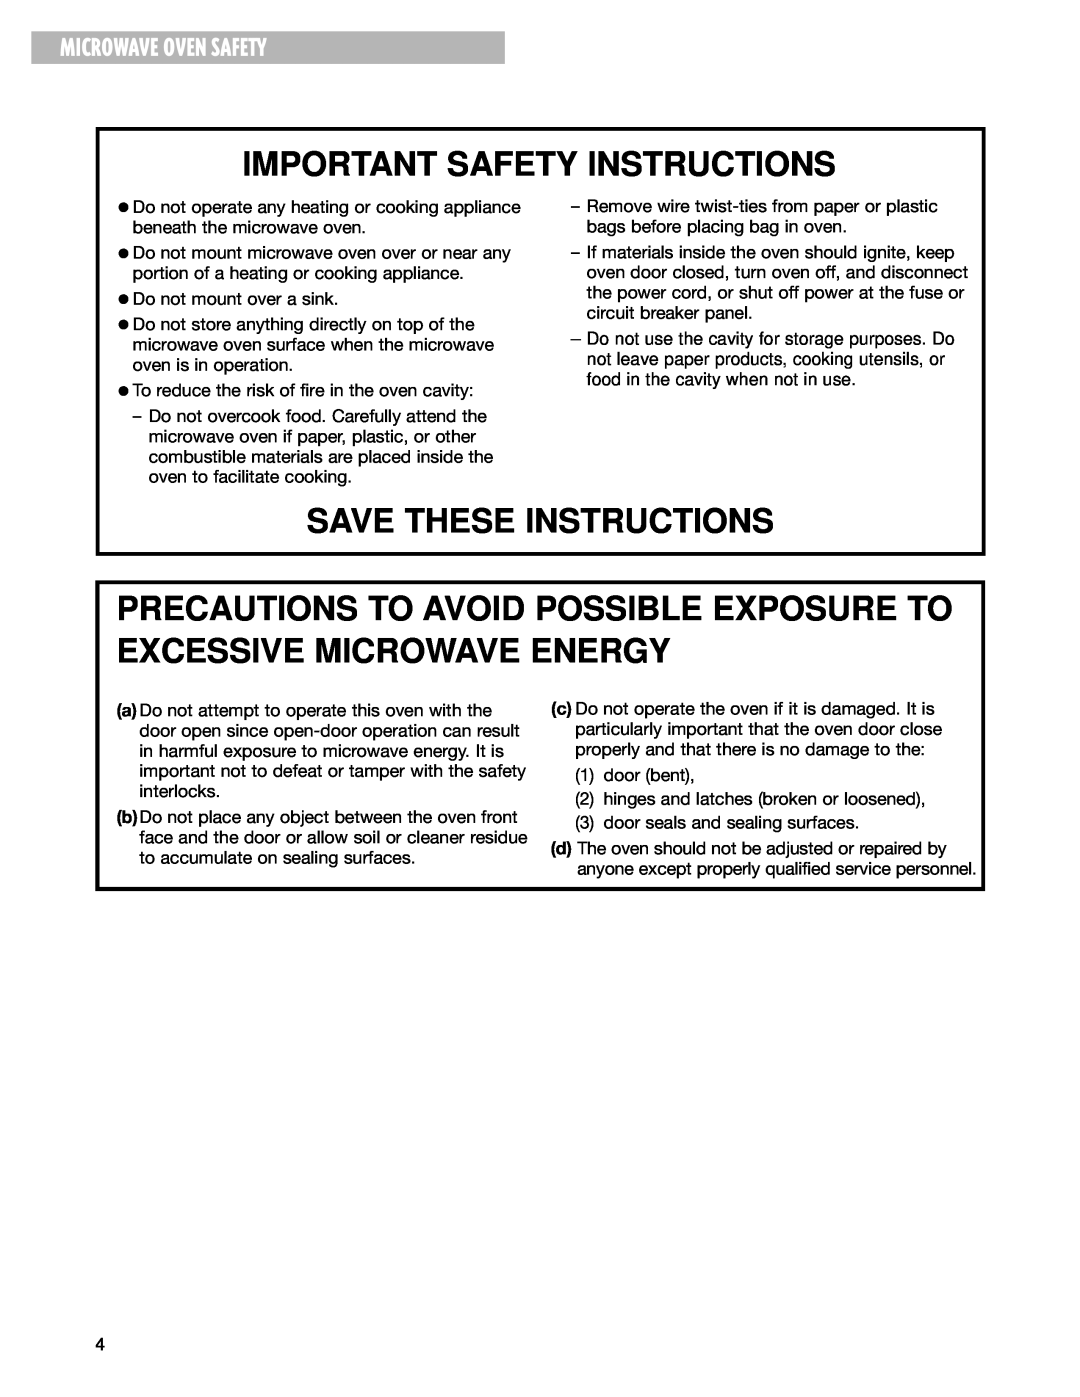 Whirlpool MT4210SL installation instructions Microwave Oven Safety, Important Safety Instructions, Save These Instructions 